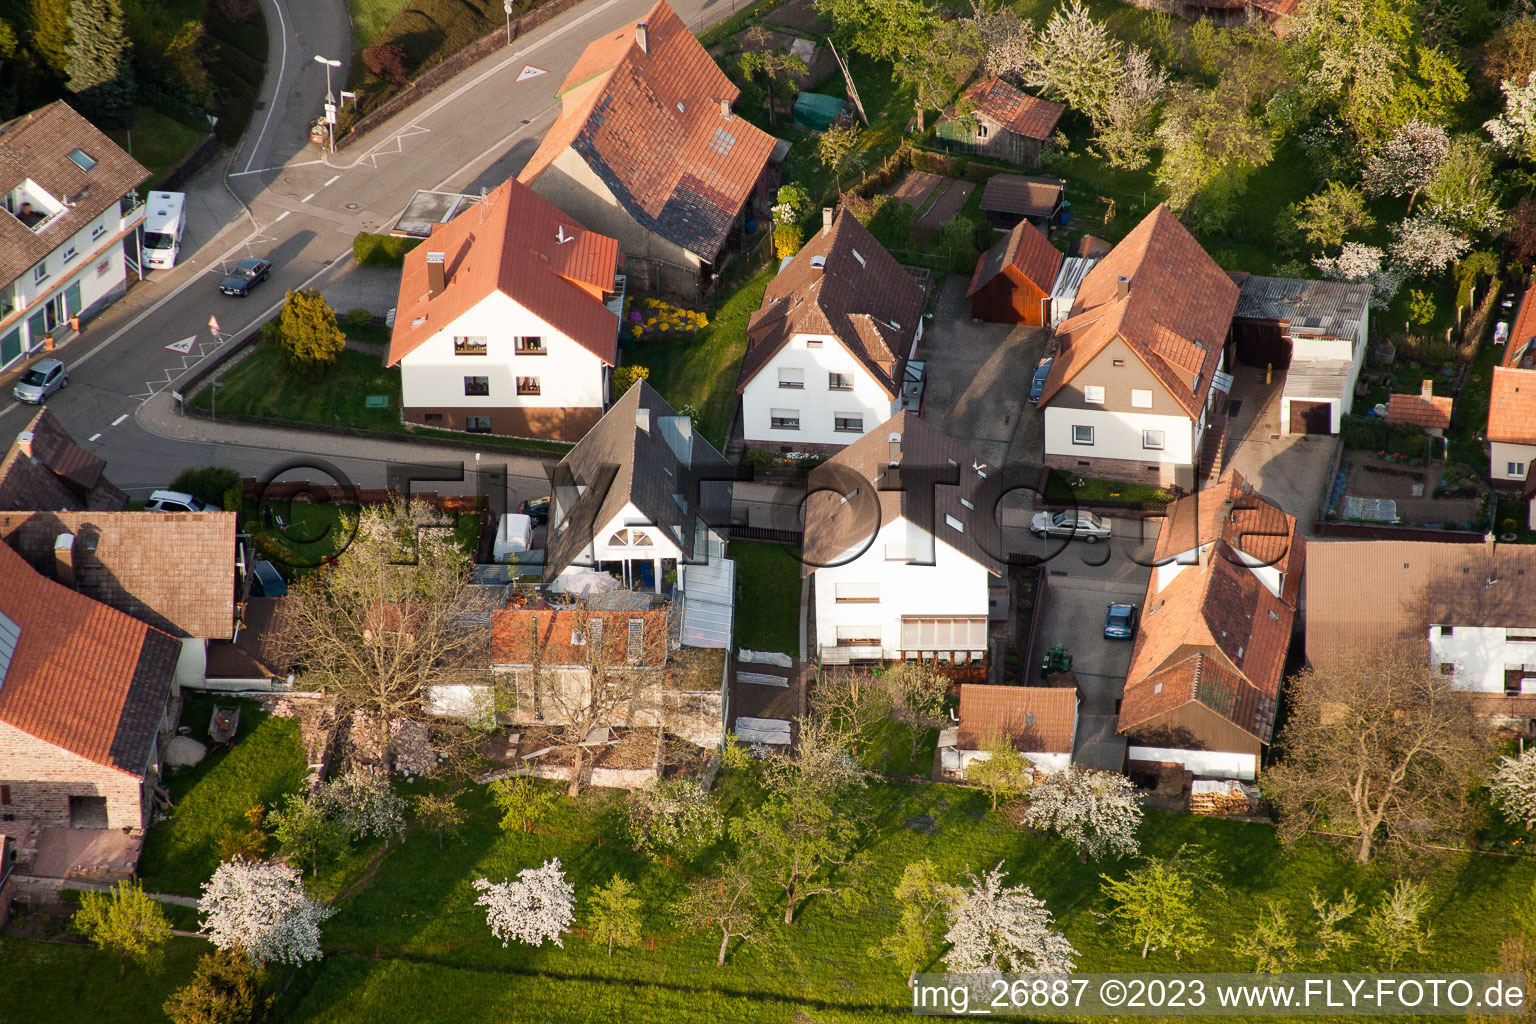 District Völkersbach in Malsch in the state Baden-Wuerttemberg, Germany from the drone perspective